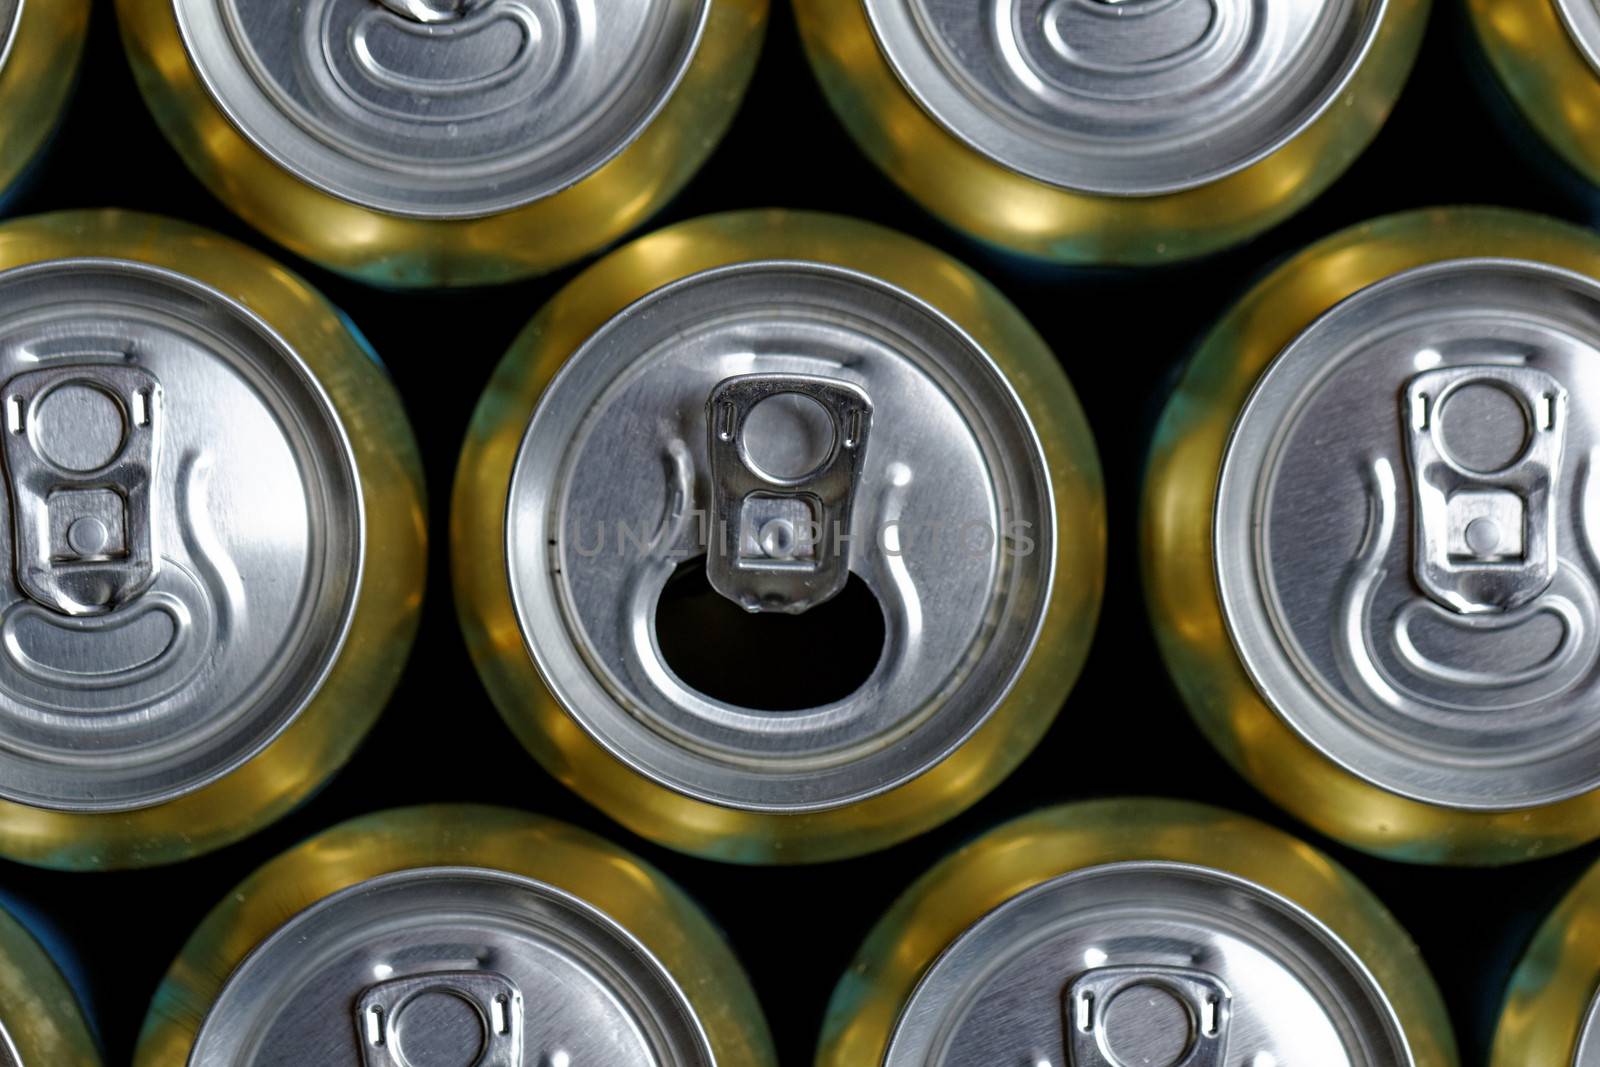 Much of drinking cans close up, one is open